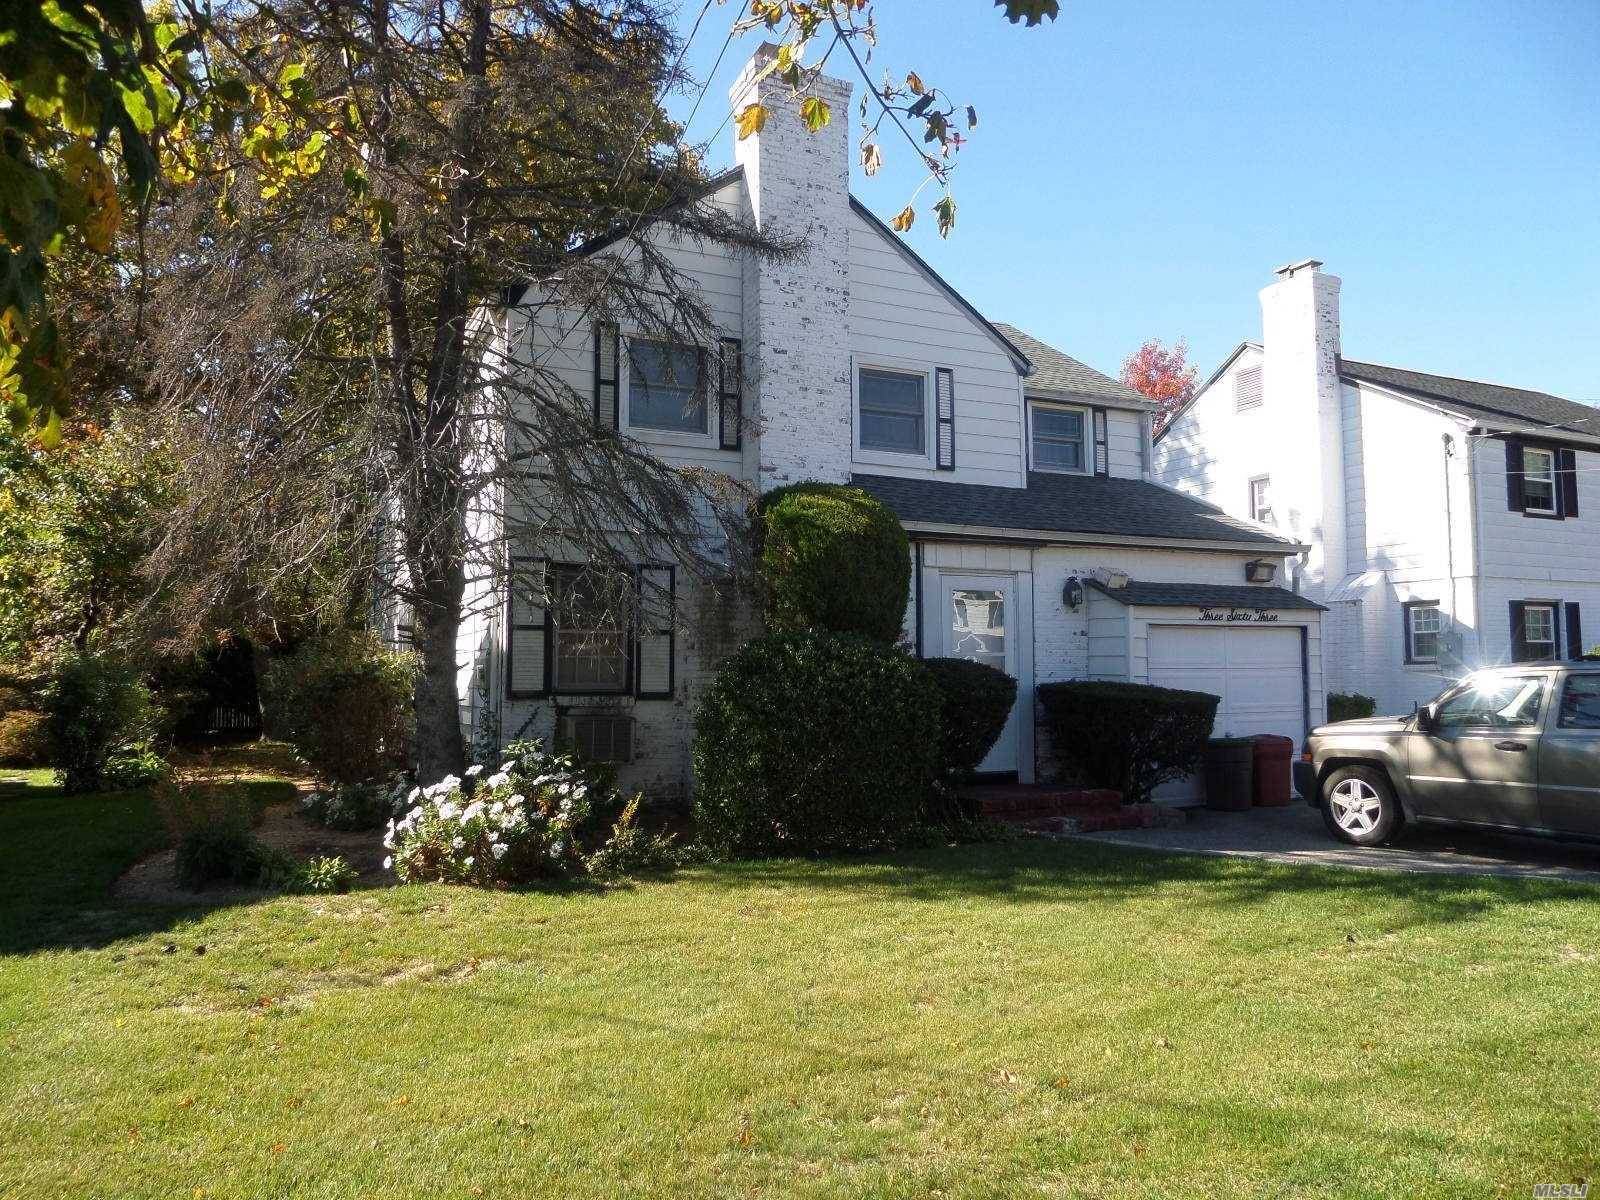 Large Side Hall Colonial On Incredible Abc Street, Needs Tlc, 4 Bedrooms On 1 Level With Oversized Master Suite.